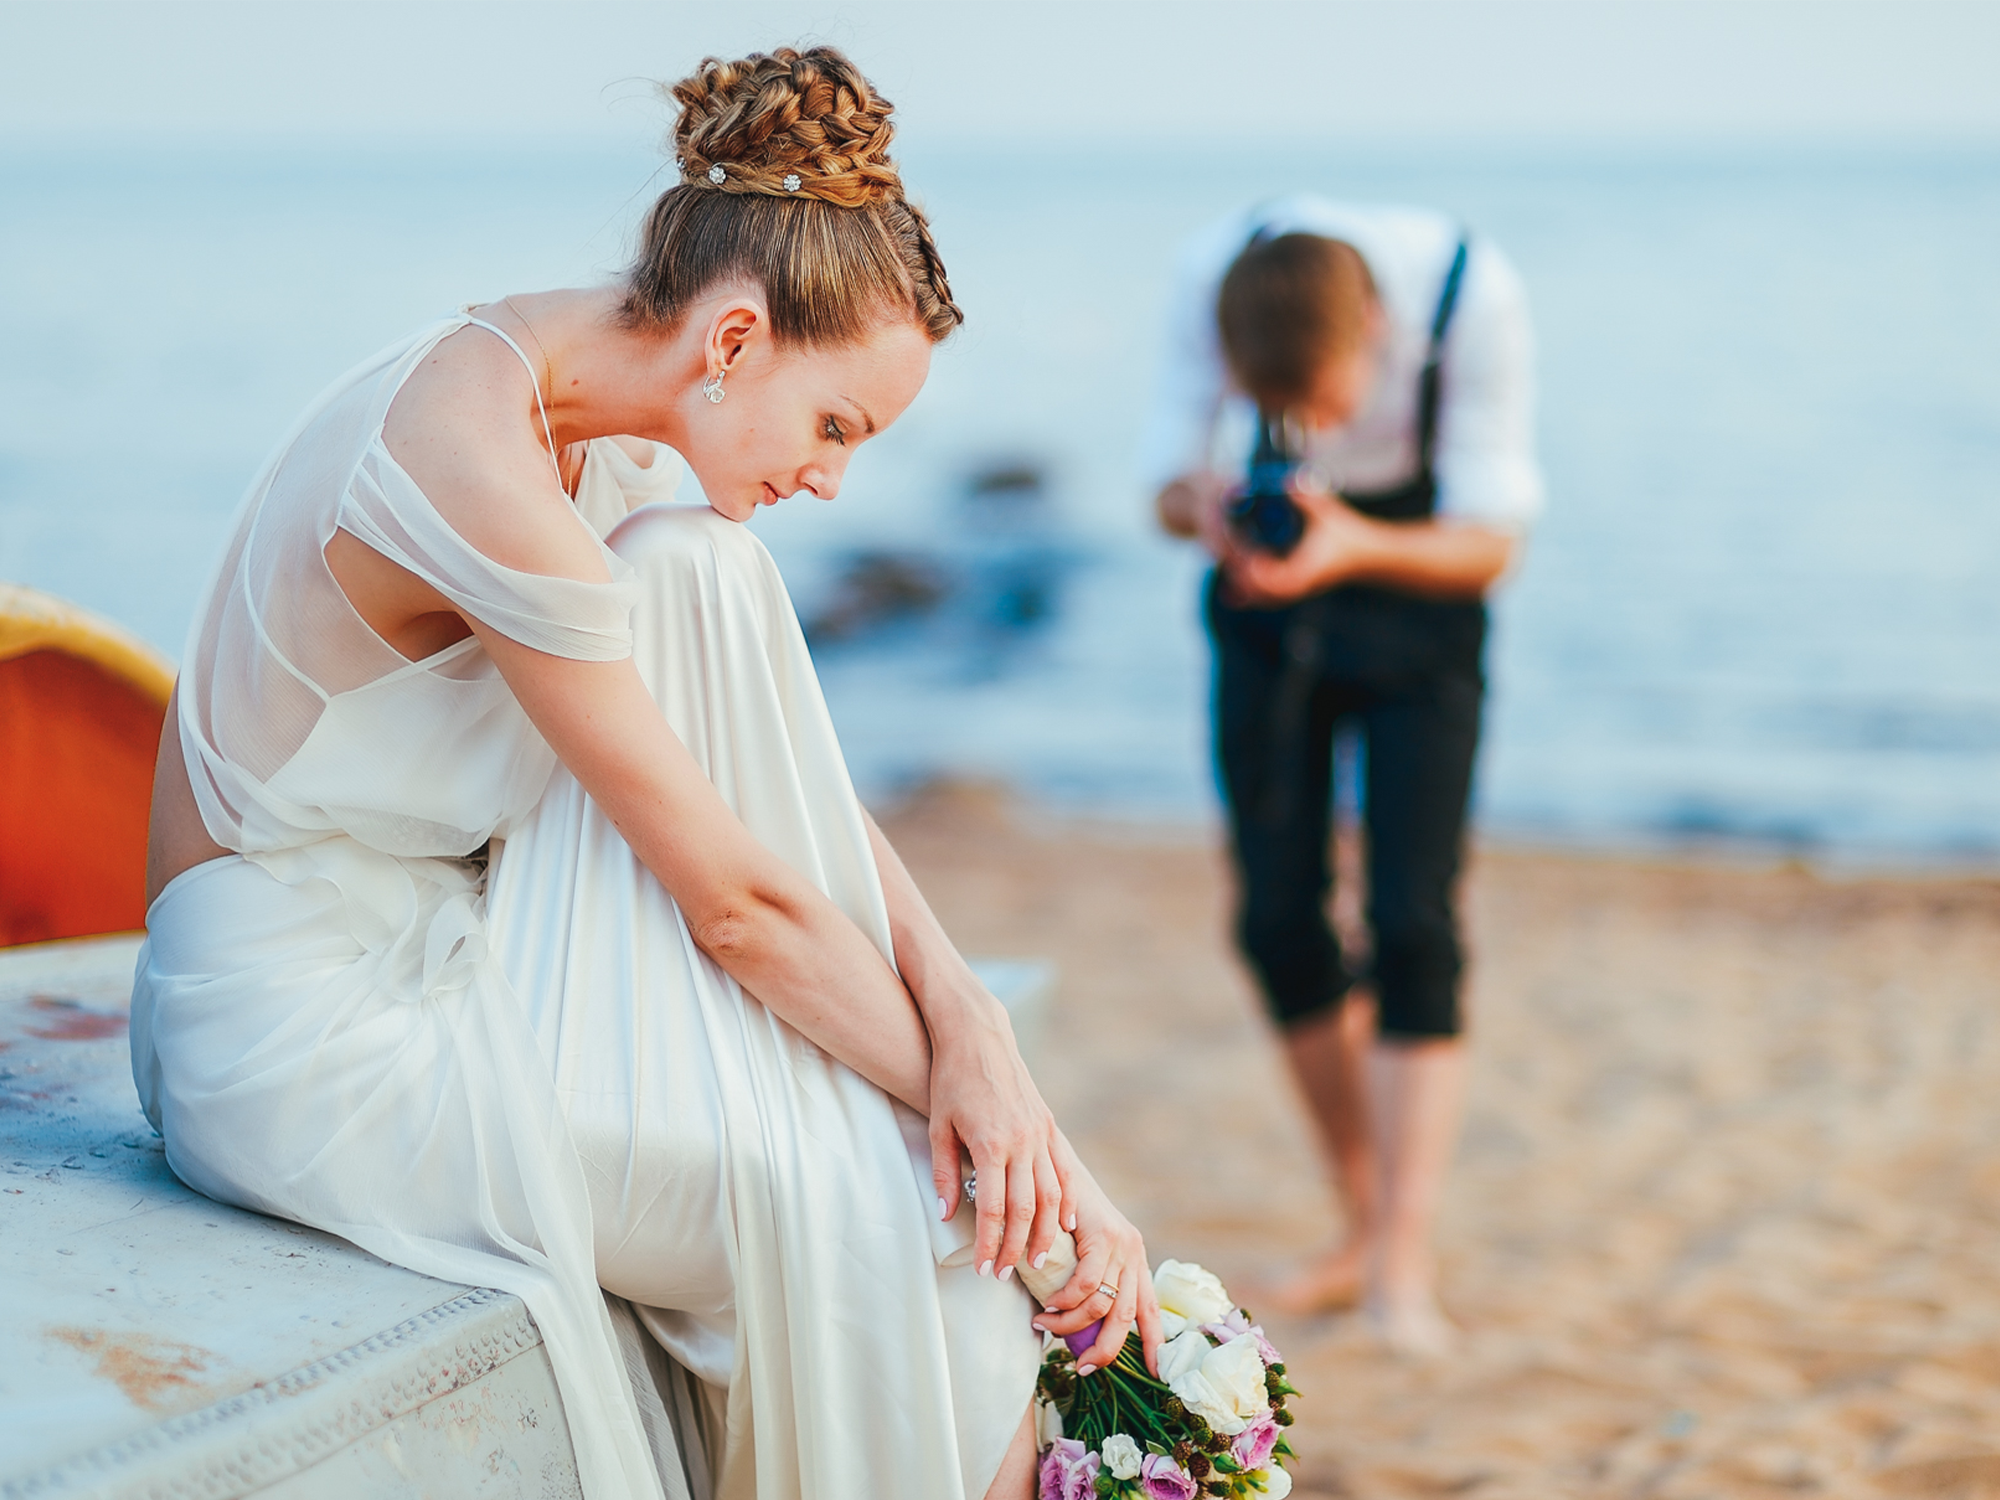 How to Photograph Weddings – Tips & Trade Tricks